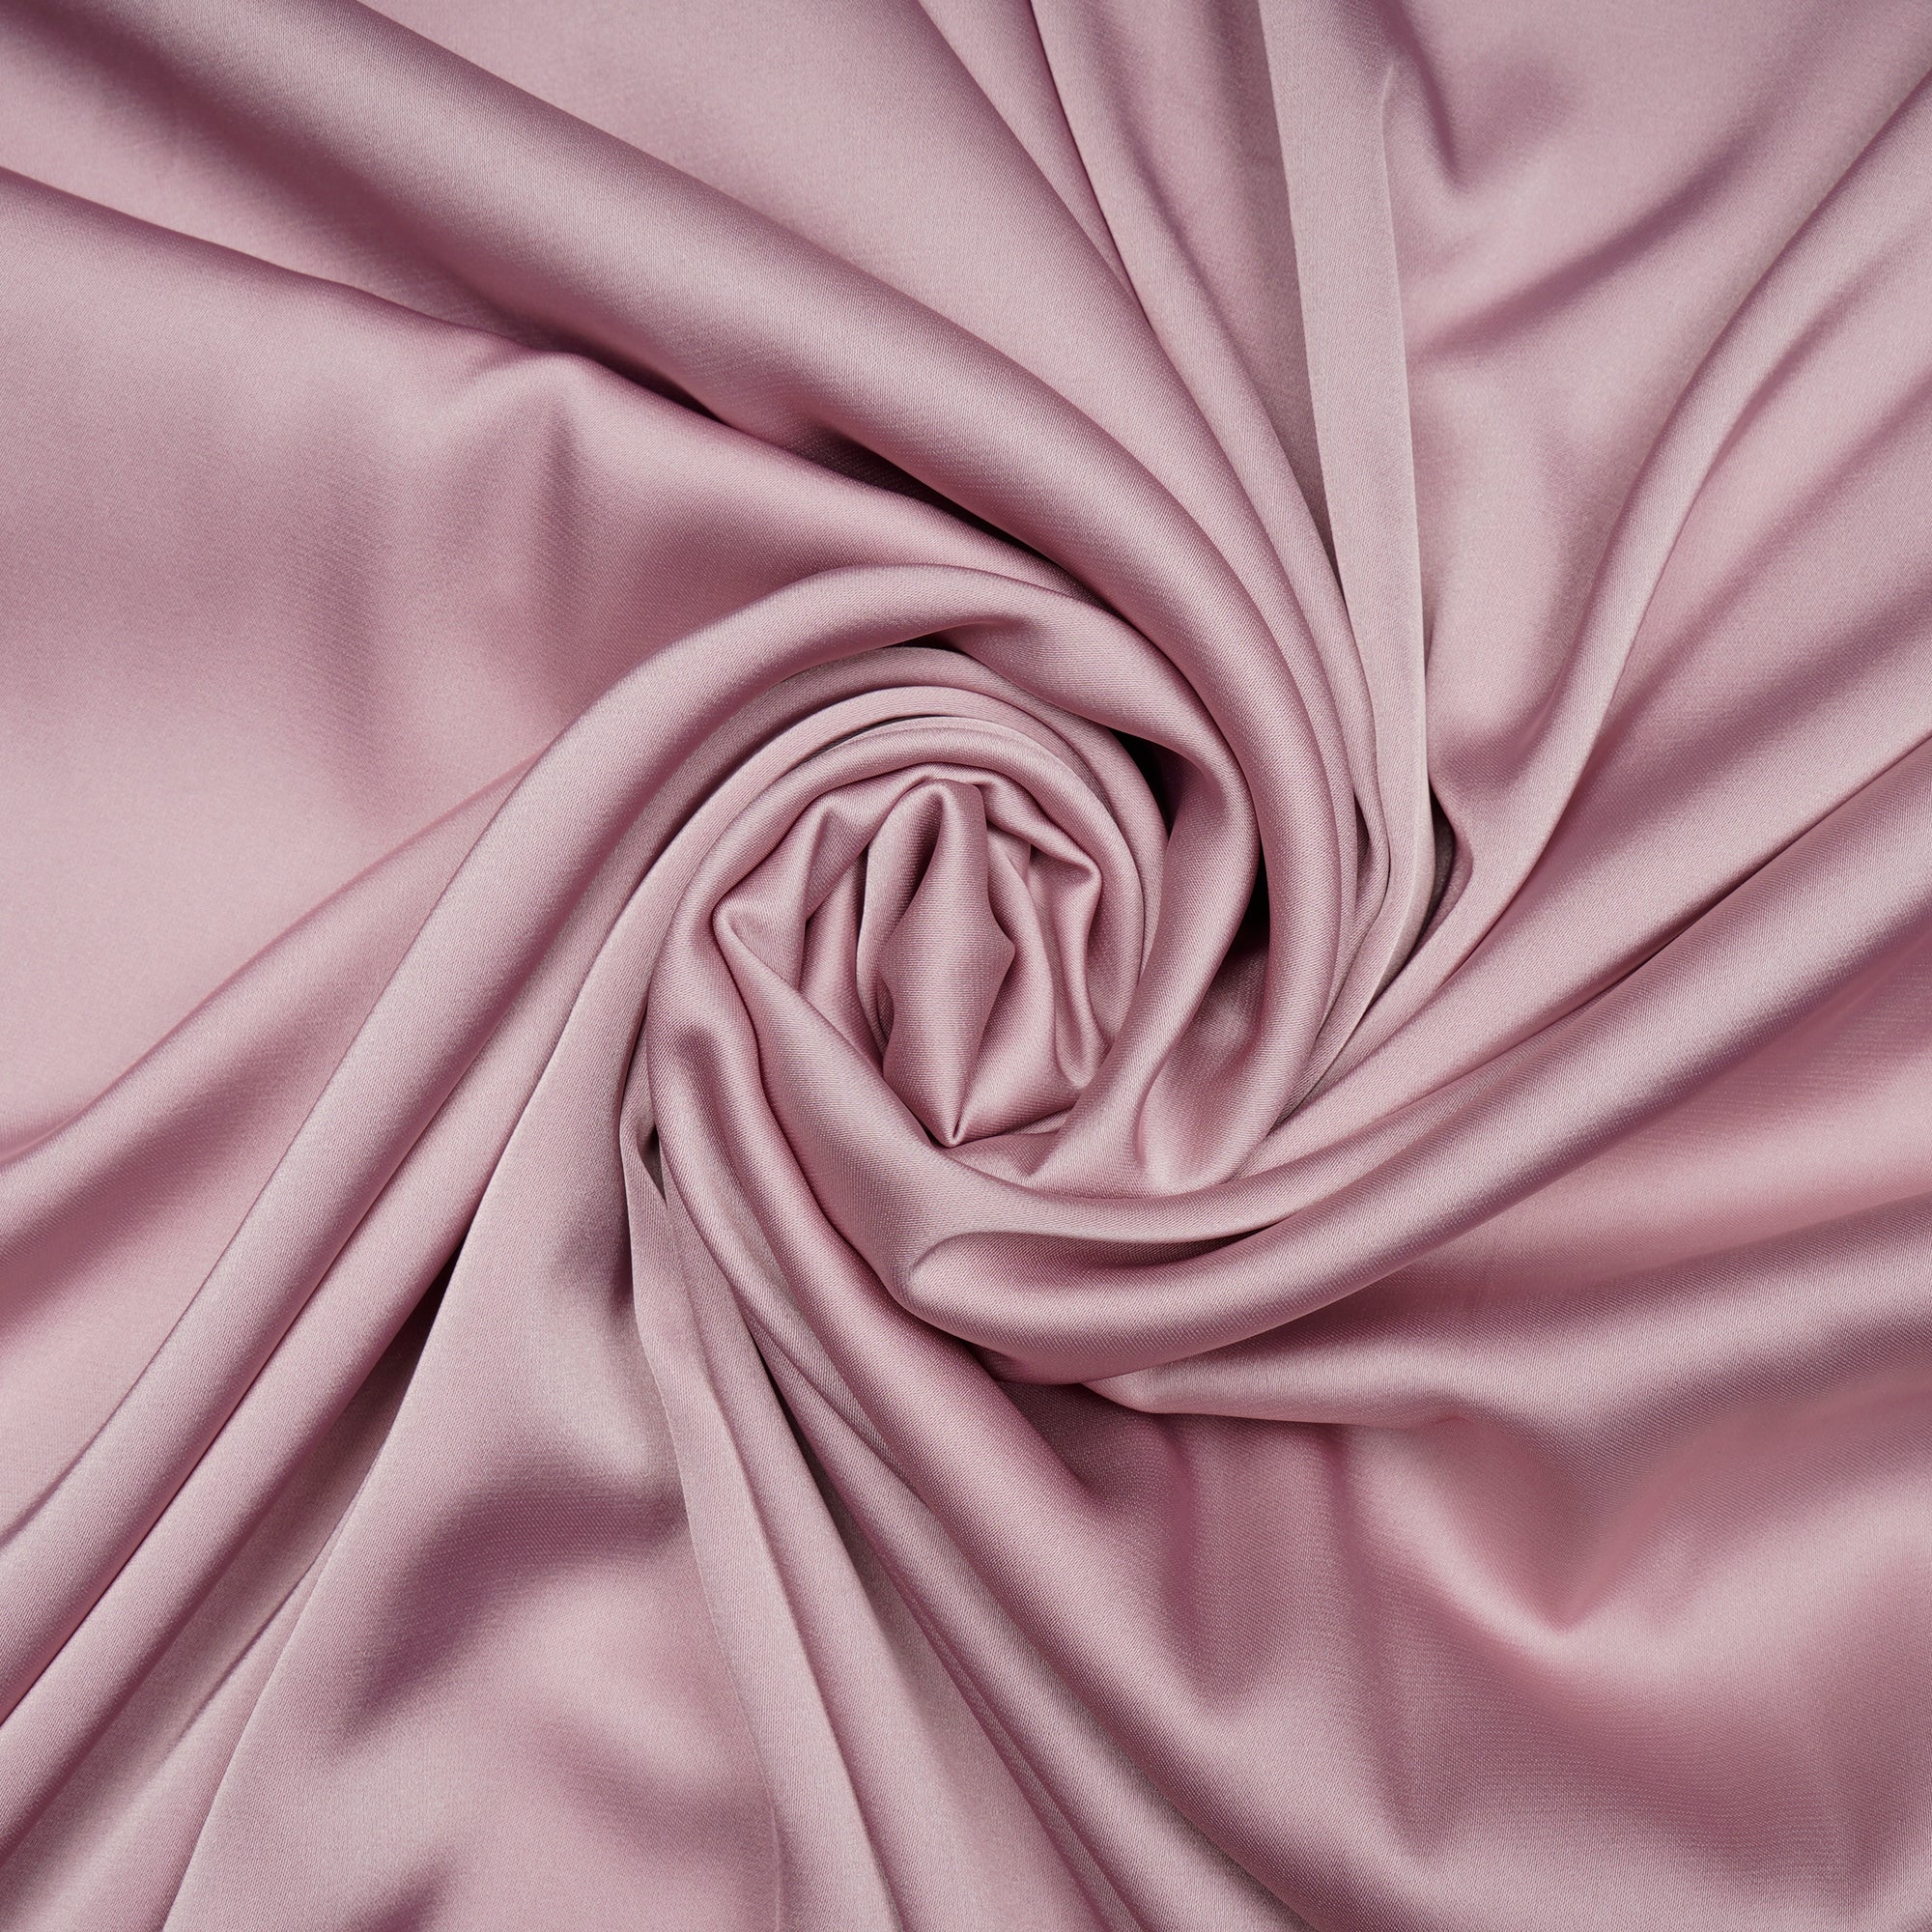 Peachskin Solid Dyed Imported Armani Satin Fabric (60" Width)